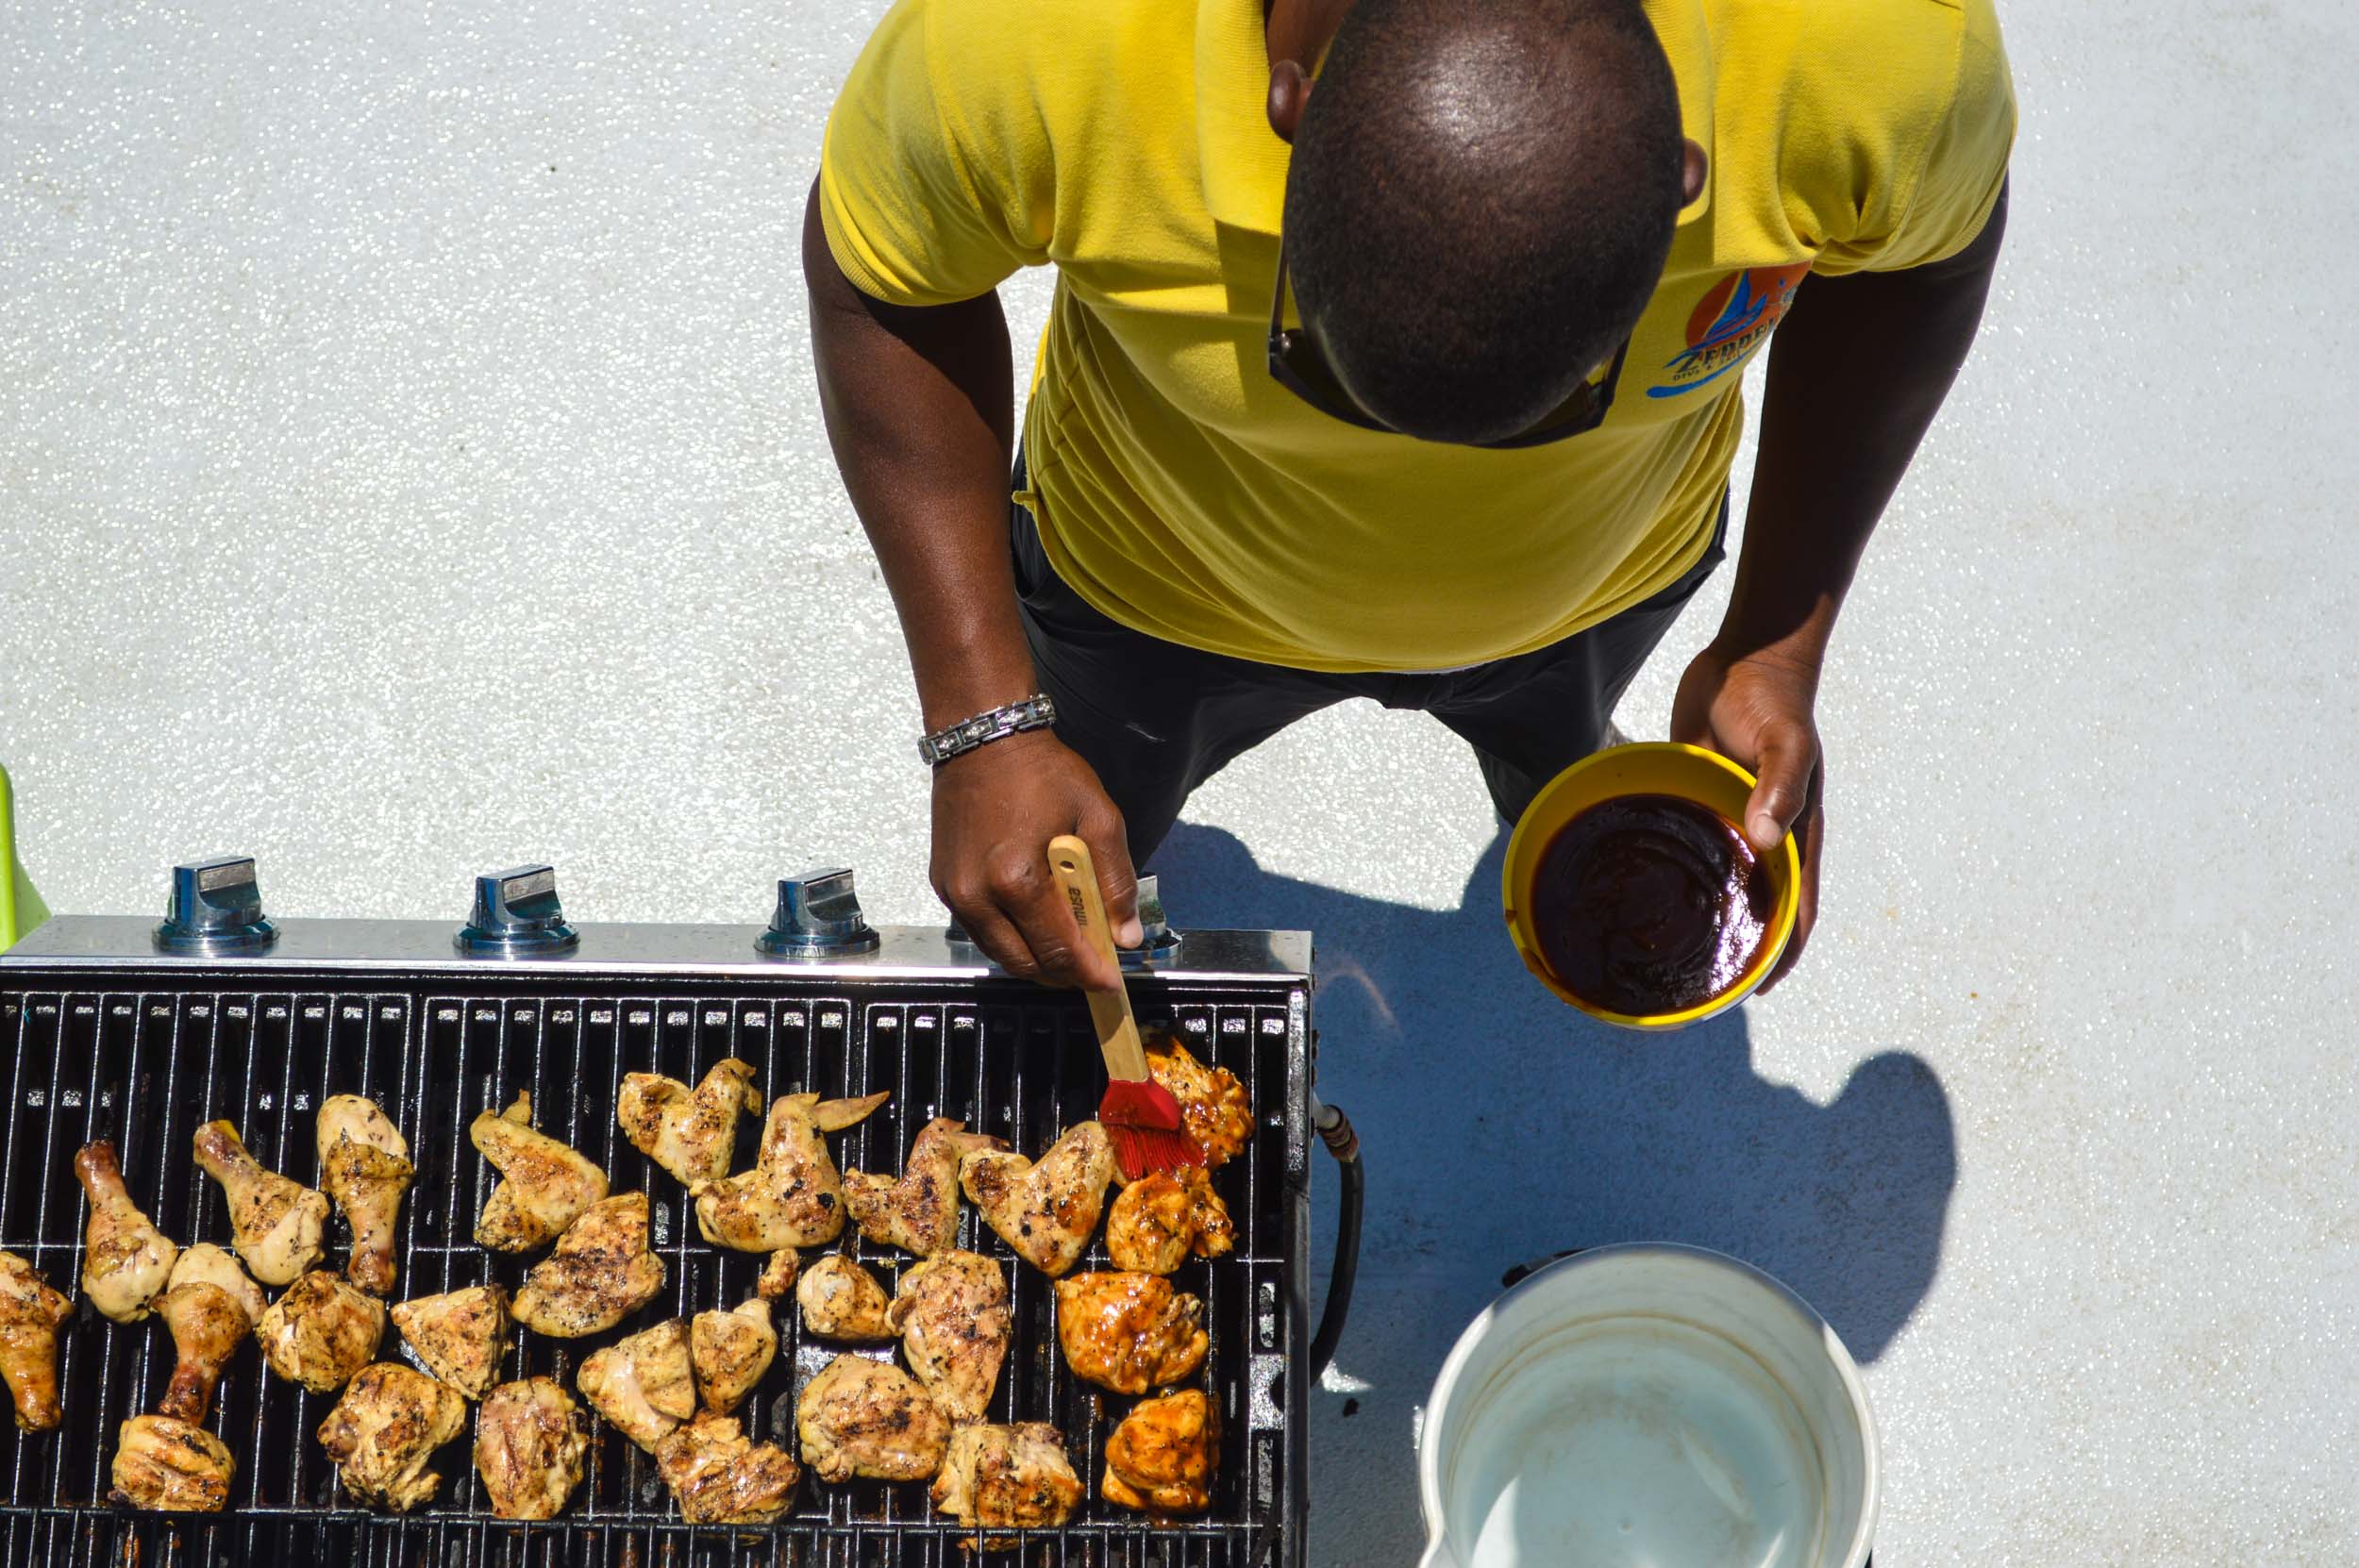 Full sized grill to prepare mouth-watering meals.